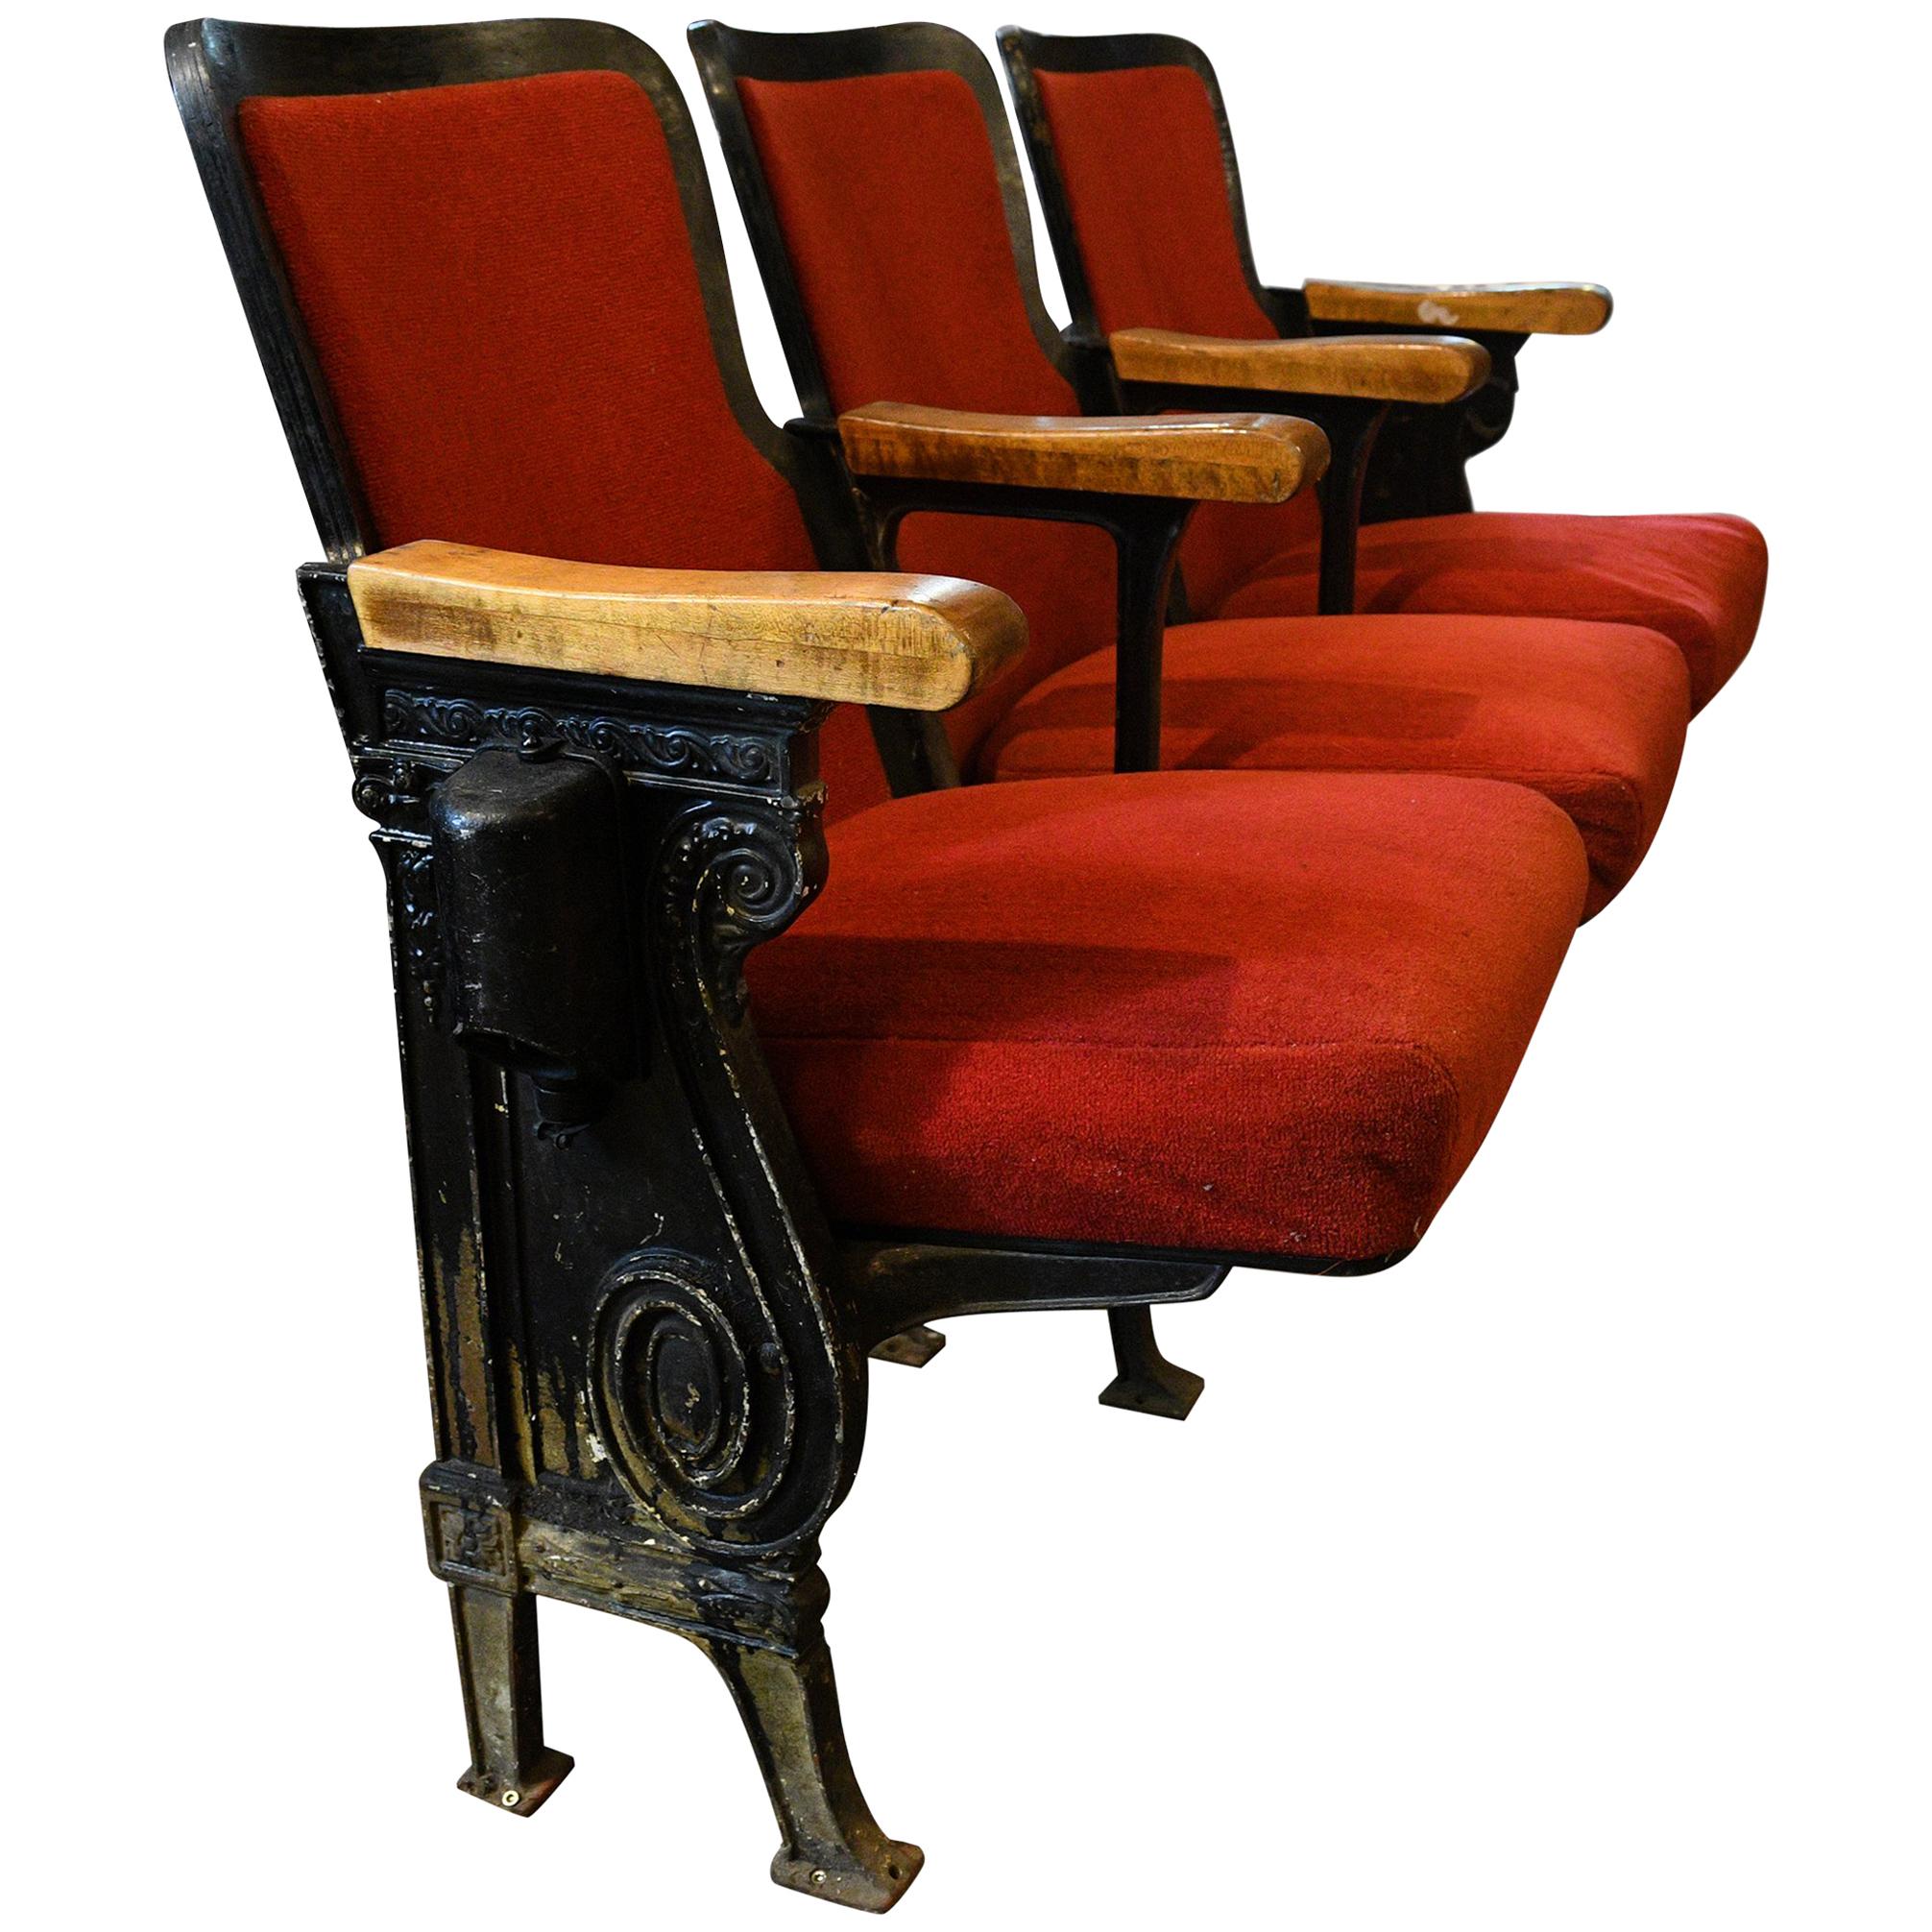 Red Upholstered Theater Seats